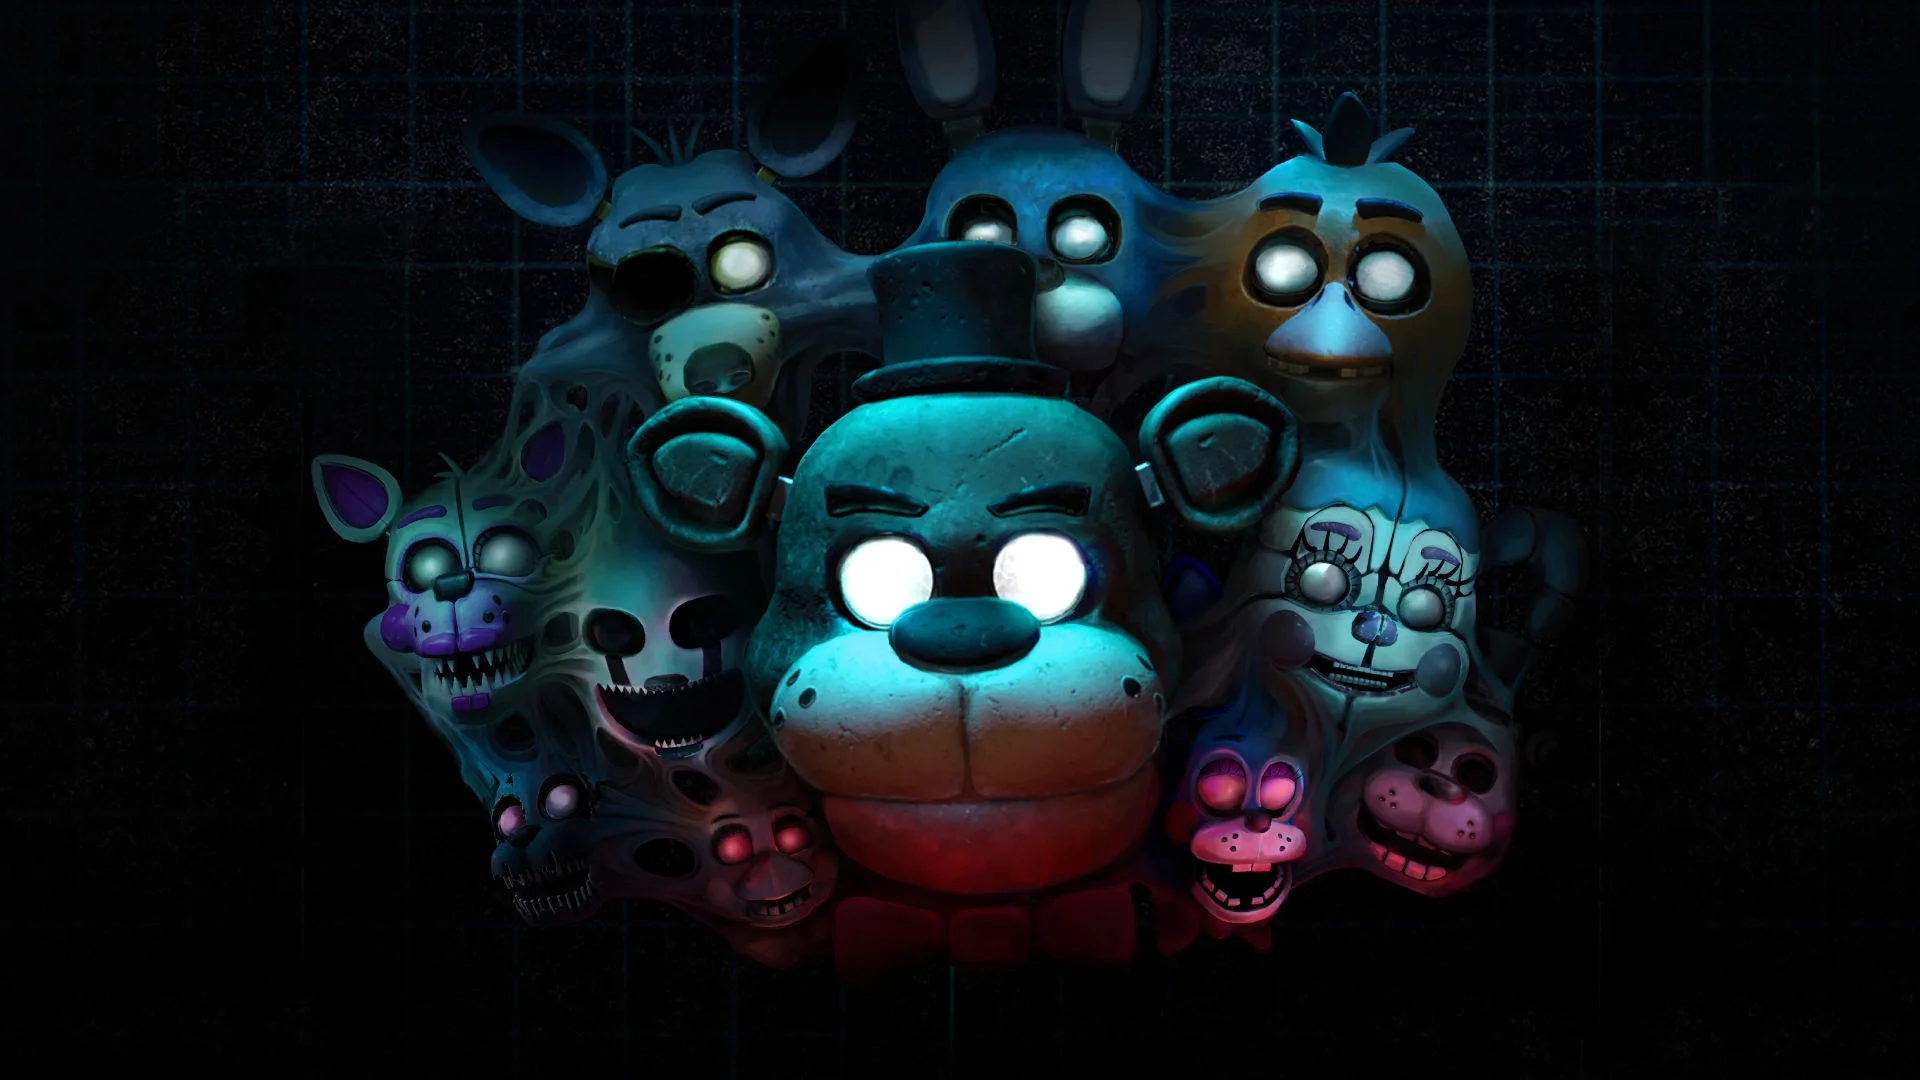 The film based on the horror film Five Nights at Freddy's received a premiere date